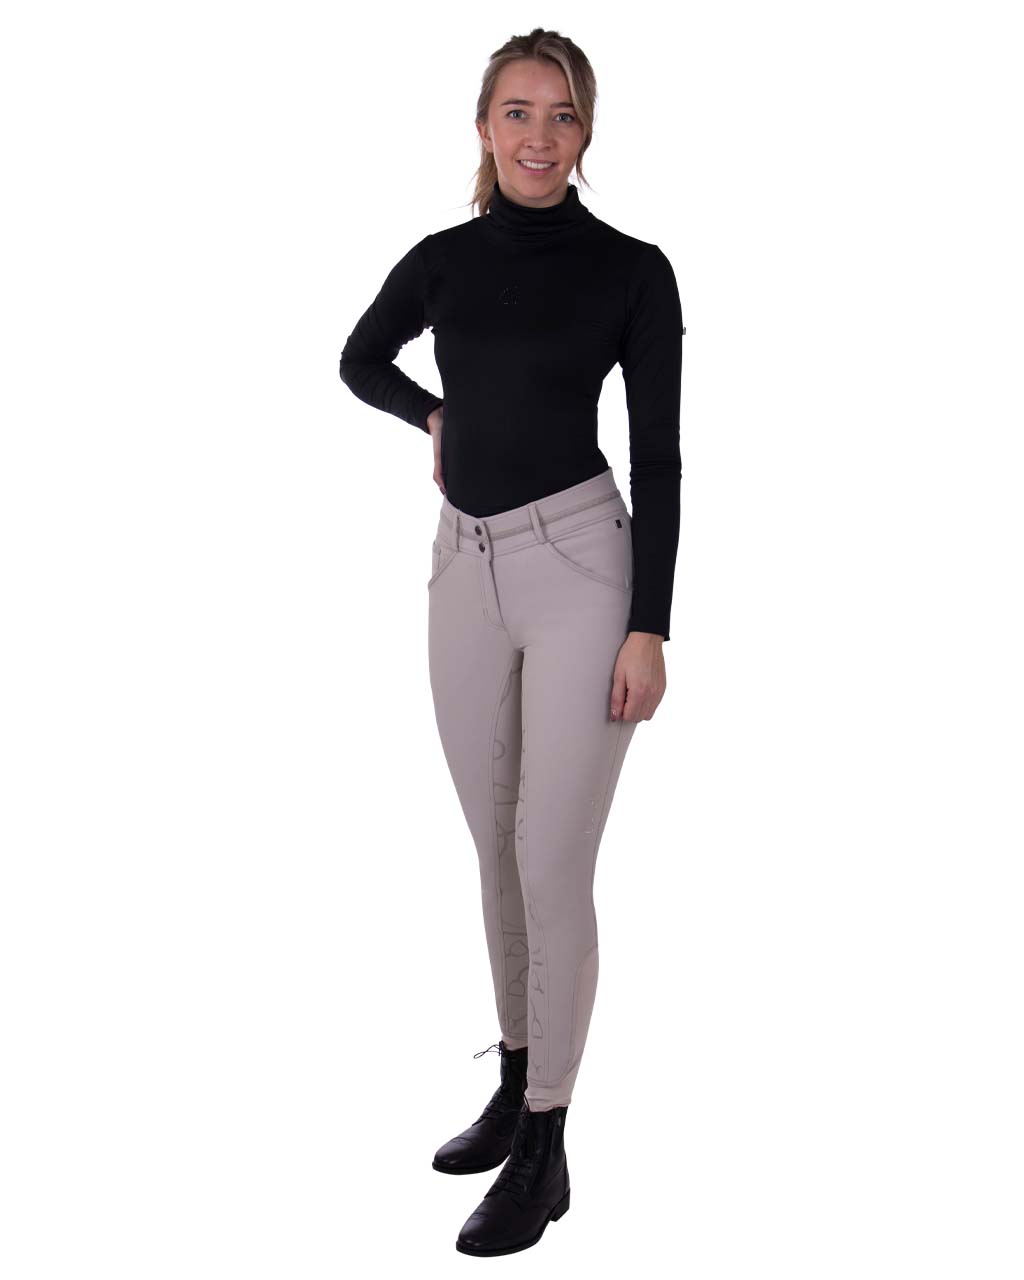 Full Seat Riding Tights for Women with Glitter Waist